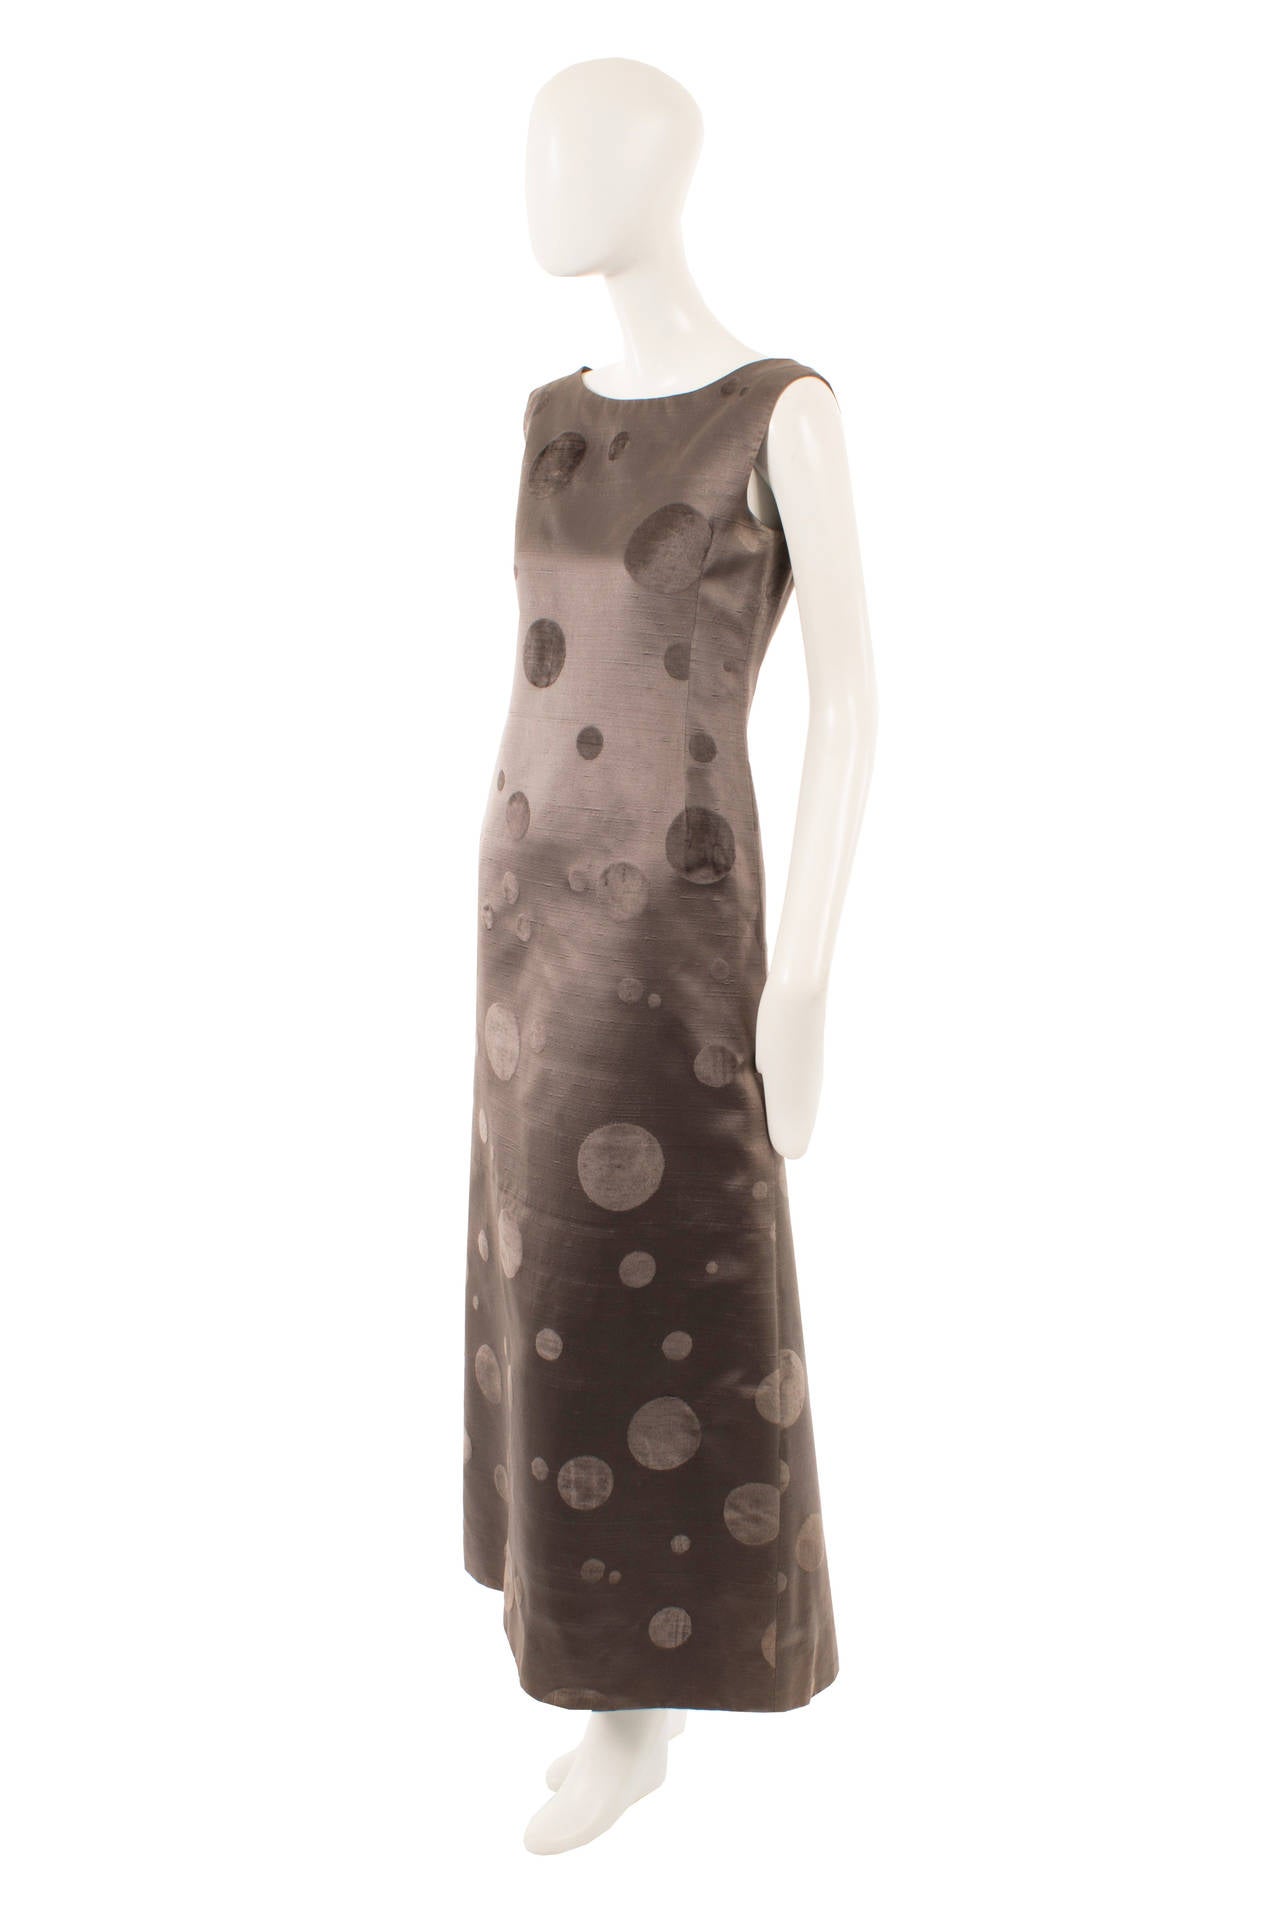 Pierre Cardin Grey Dress, Circa 1969 In Excellent Condition For Sale In London, GB